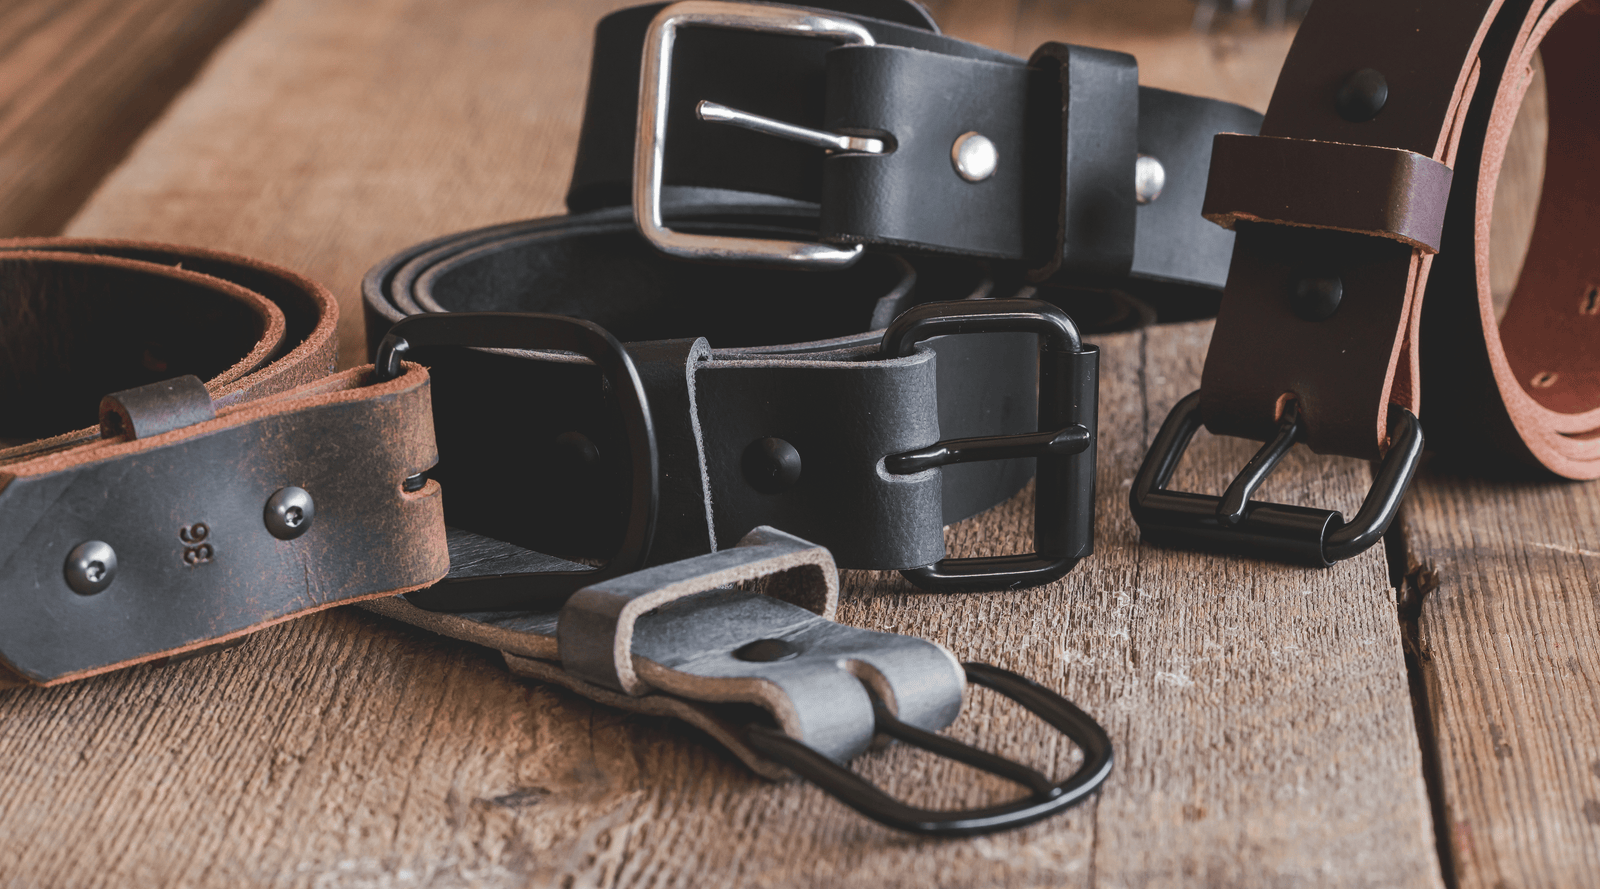 Main Street Forge All American Stitched Leather Belt | Made in USA | Men's Heavy Duty Work Belt | EDC Belt